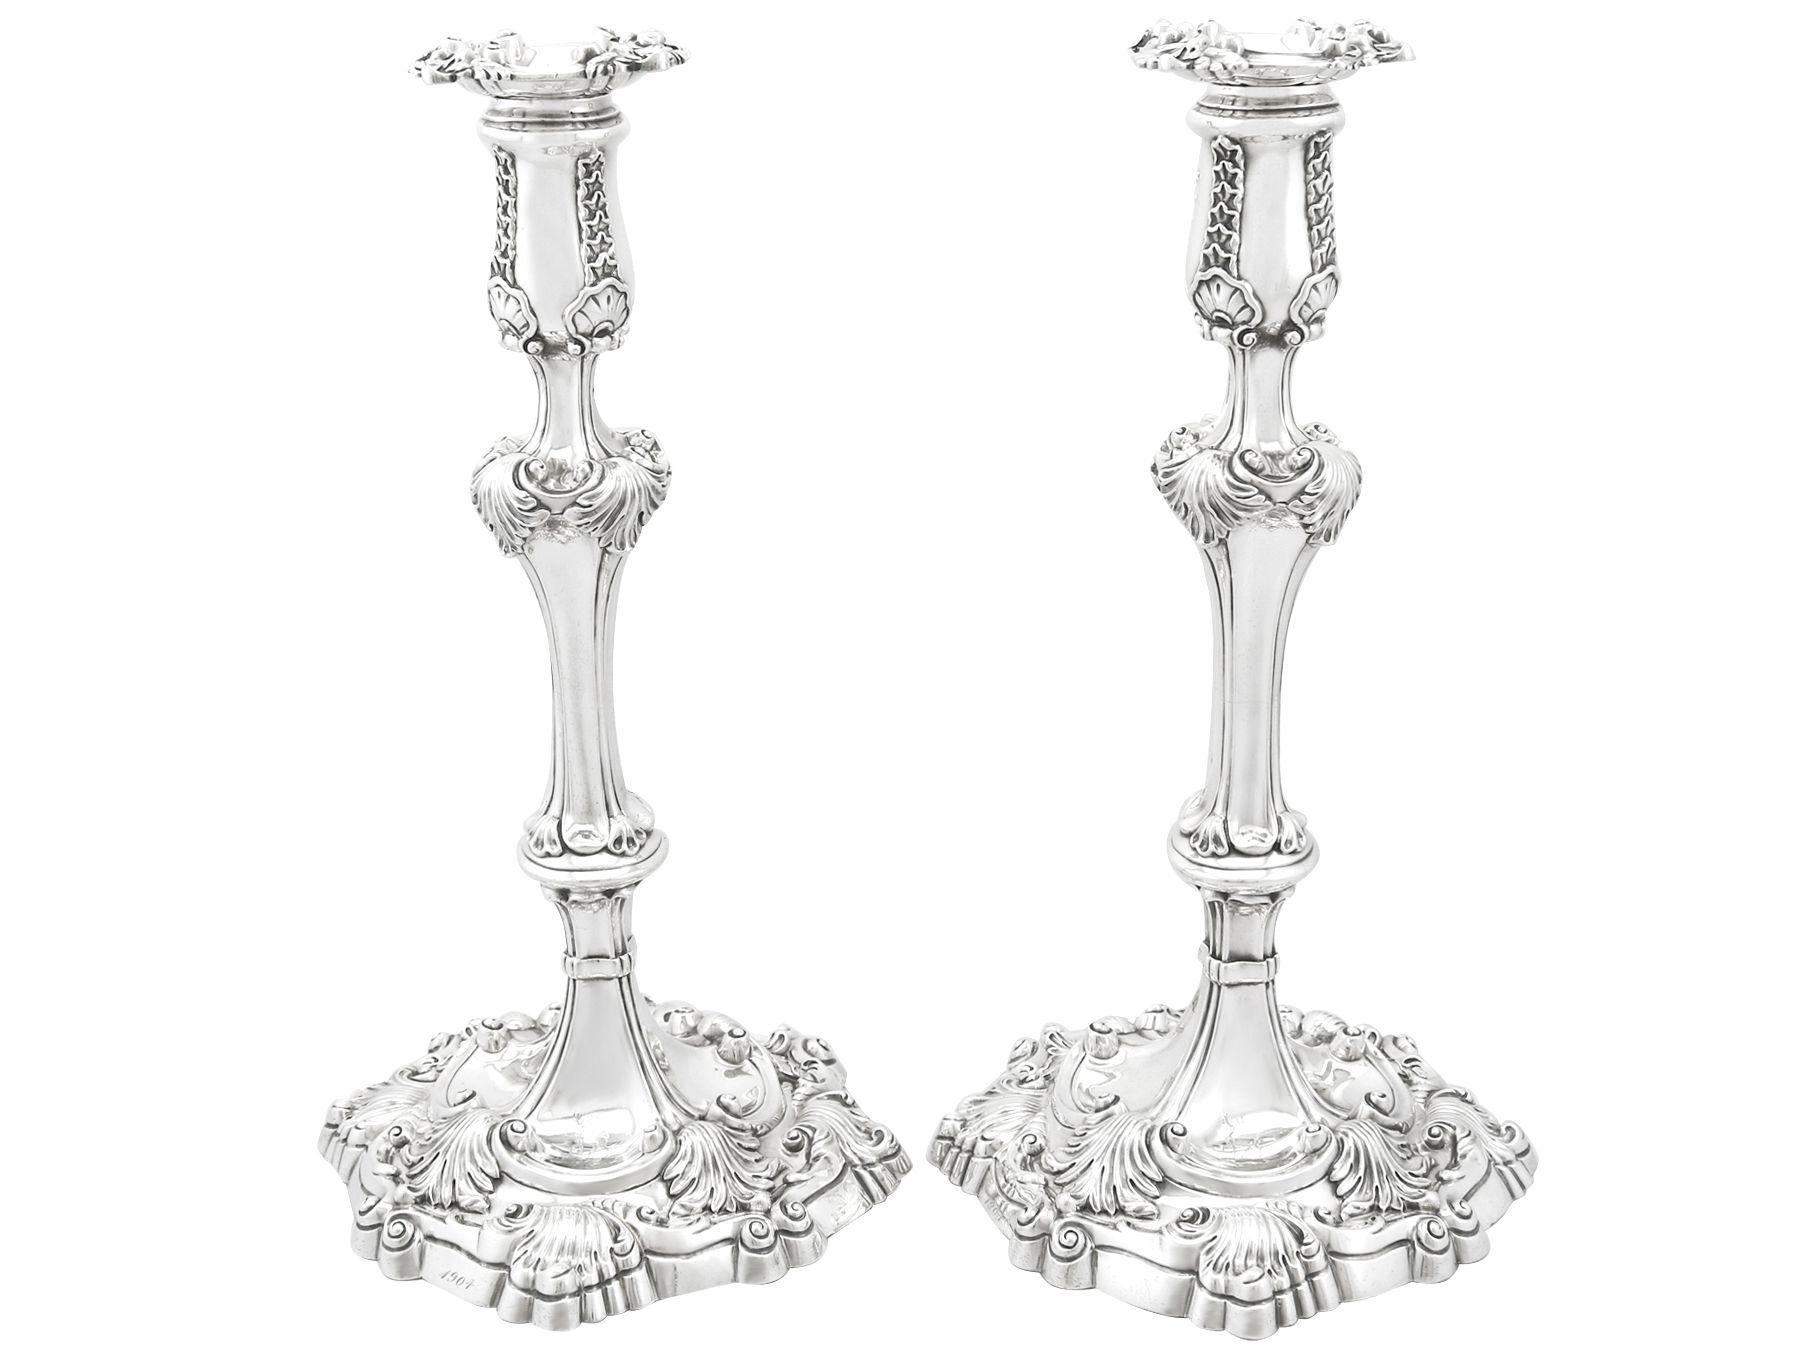 A magnificent, fine and impressive pair of antique George IV English cast sterling silver candlesticks made by Robert Garrard II; an addition of our ornamental silverware collection

These magnificent antique George IV cast sterling silver